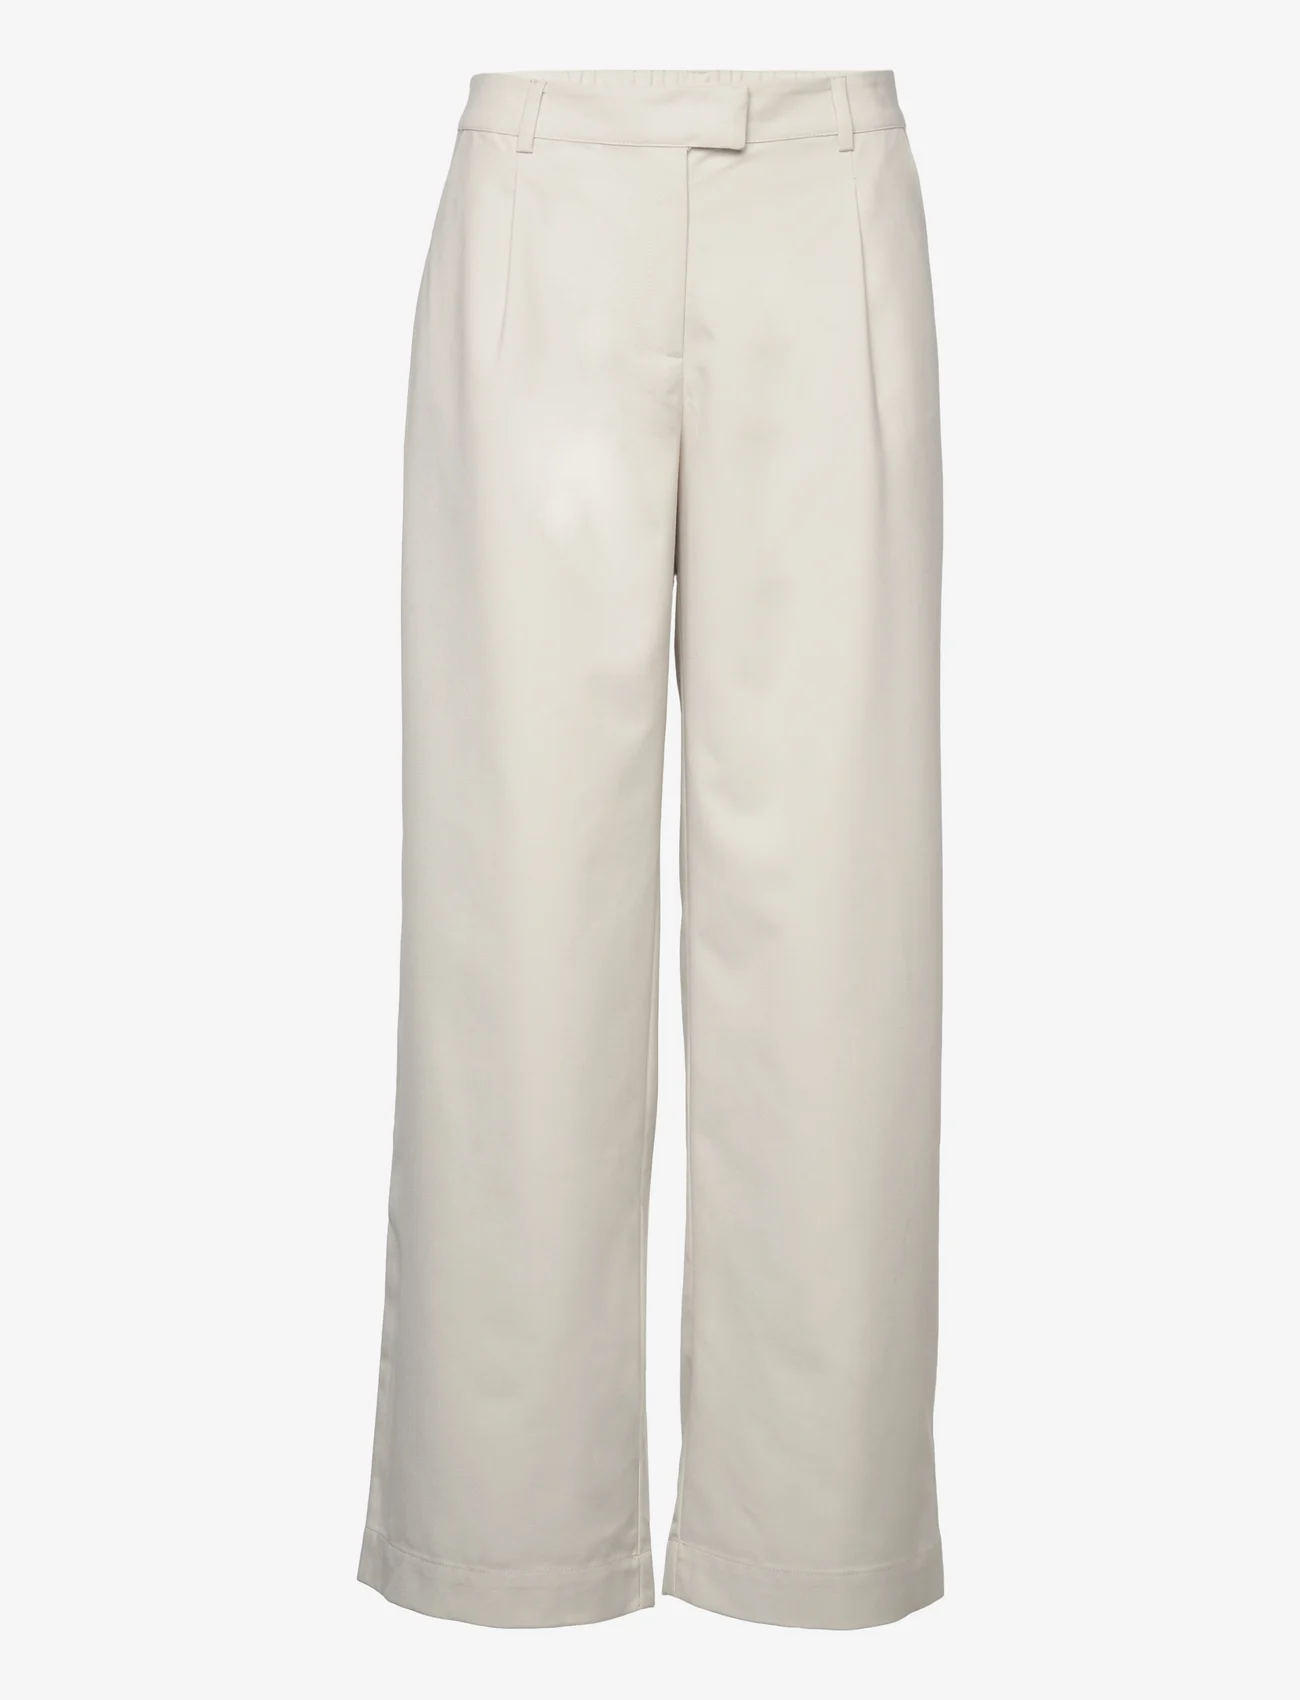 Envii - ENBETA PANTS 7049 - party wear at outlet prices - oatmeal - 0